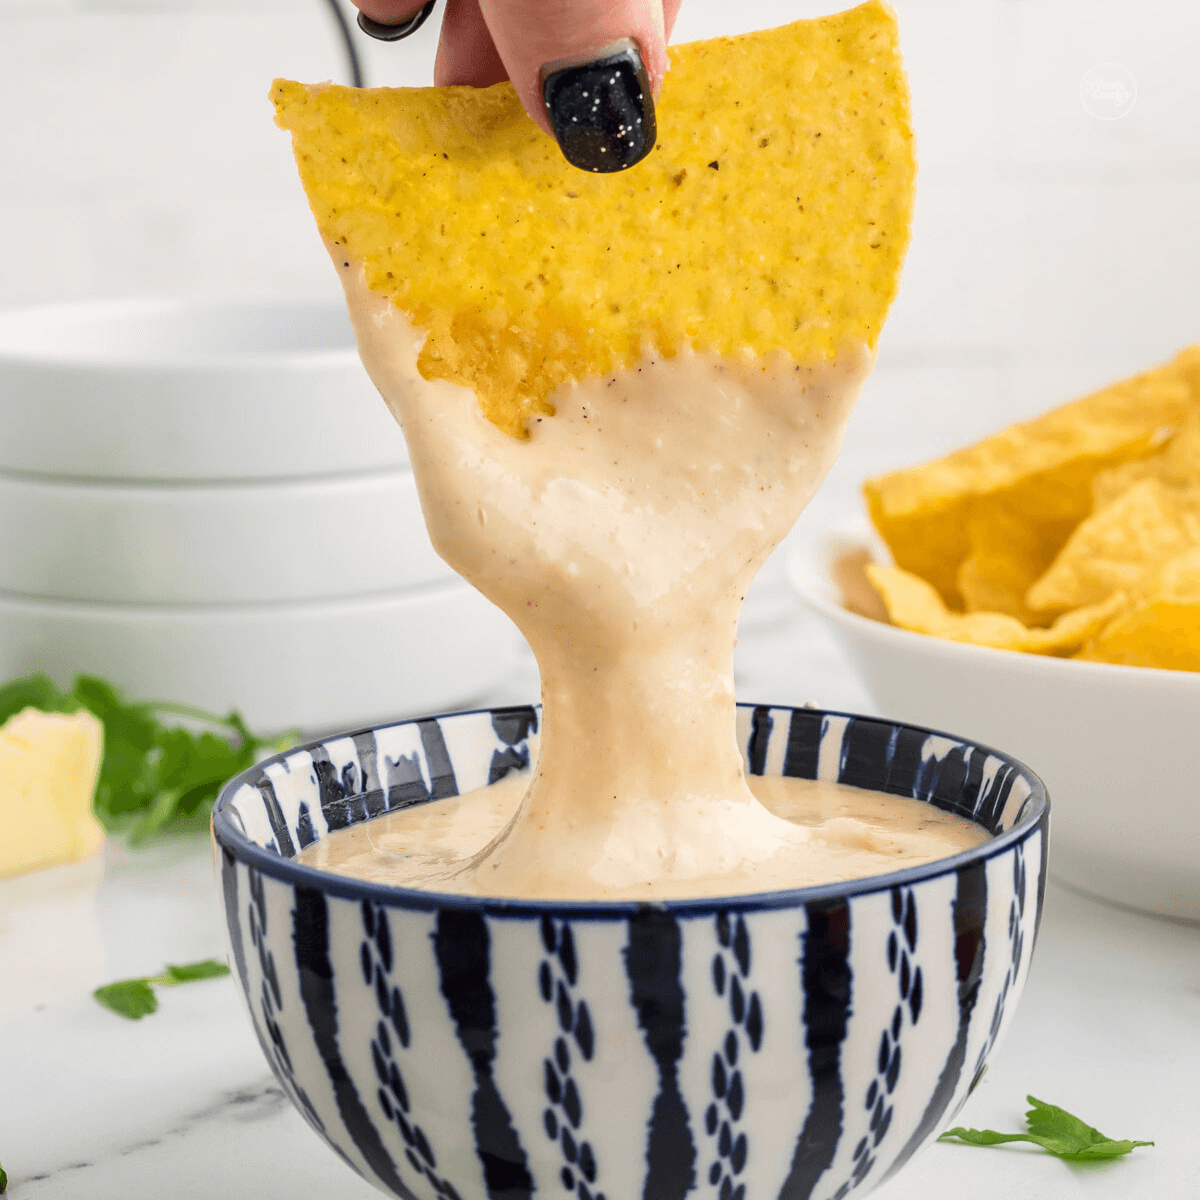 Hand dipping tortilla chip into queso cheese dip.